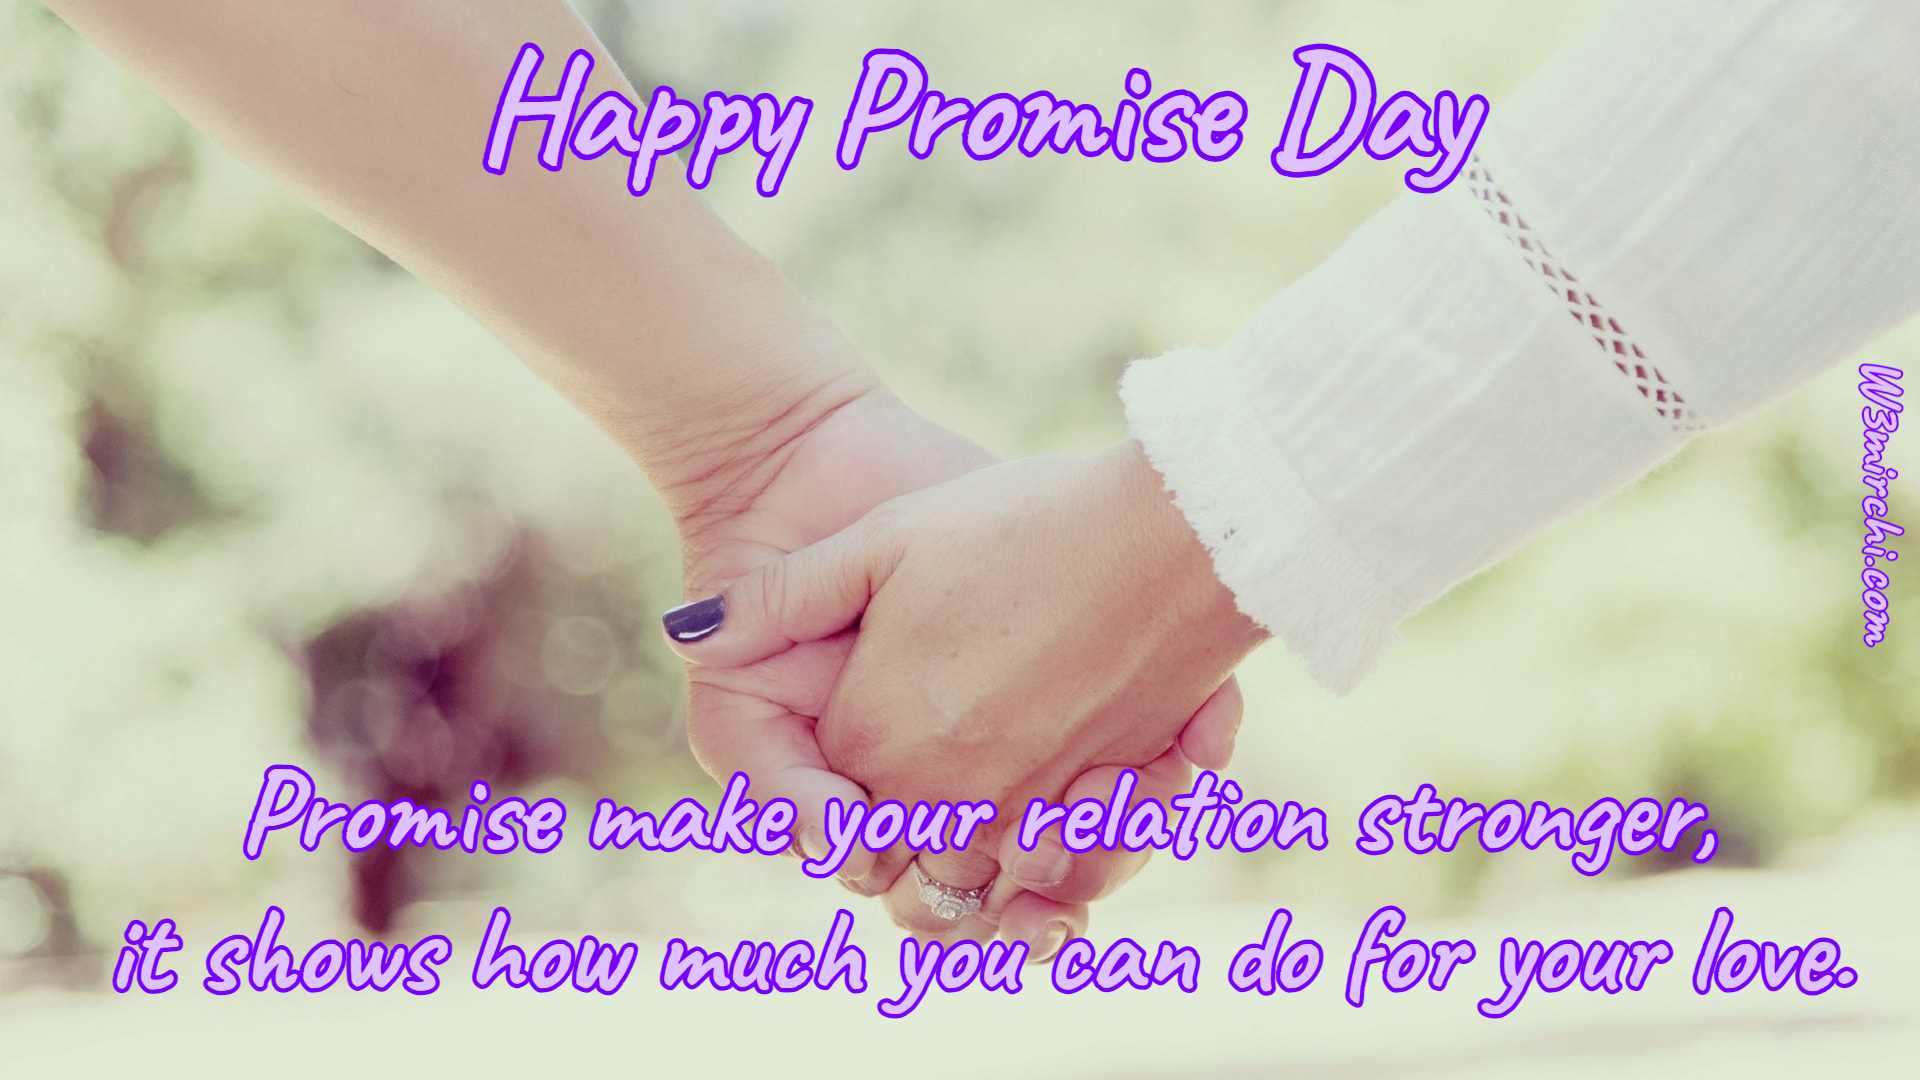 Promise make your relation stronger,